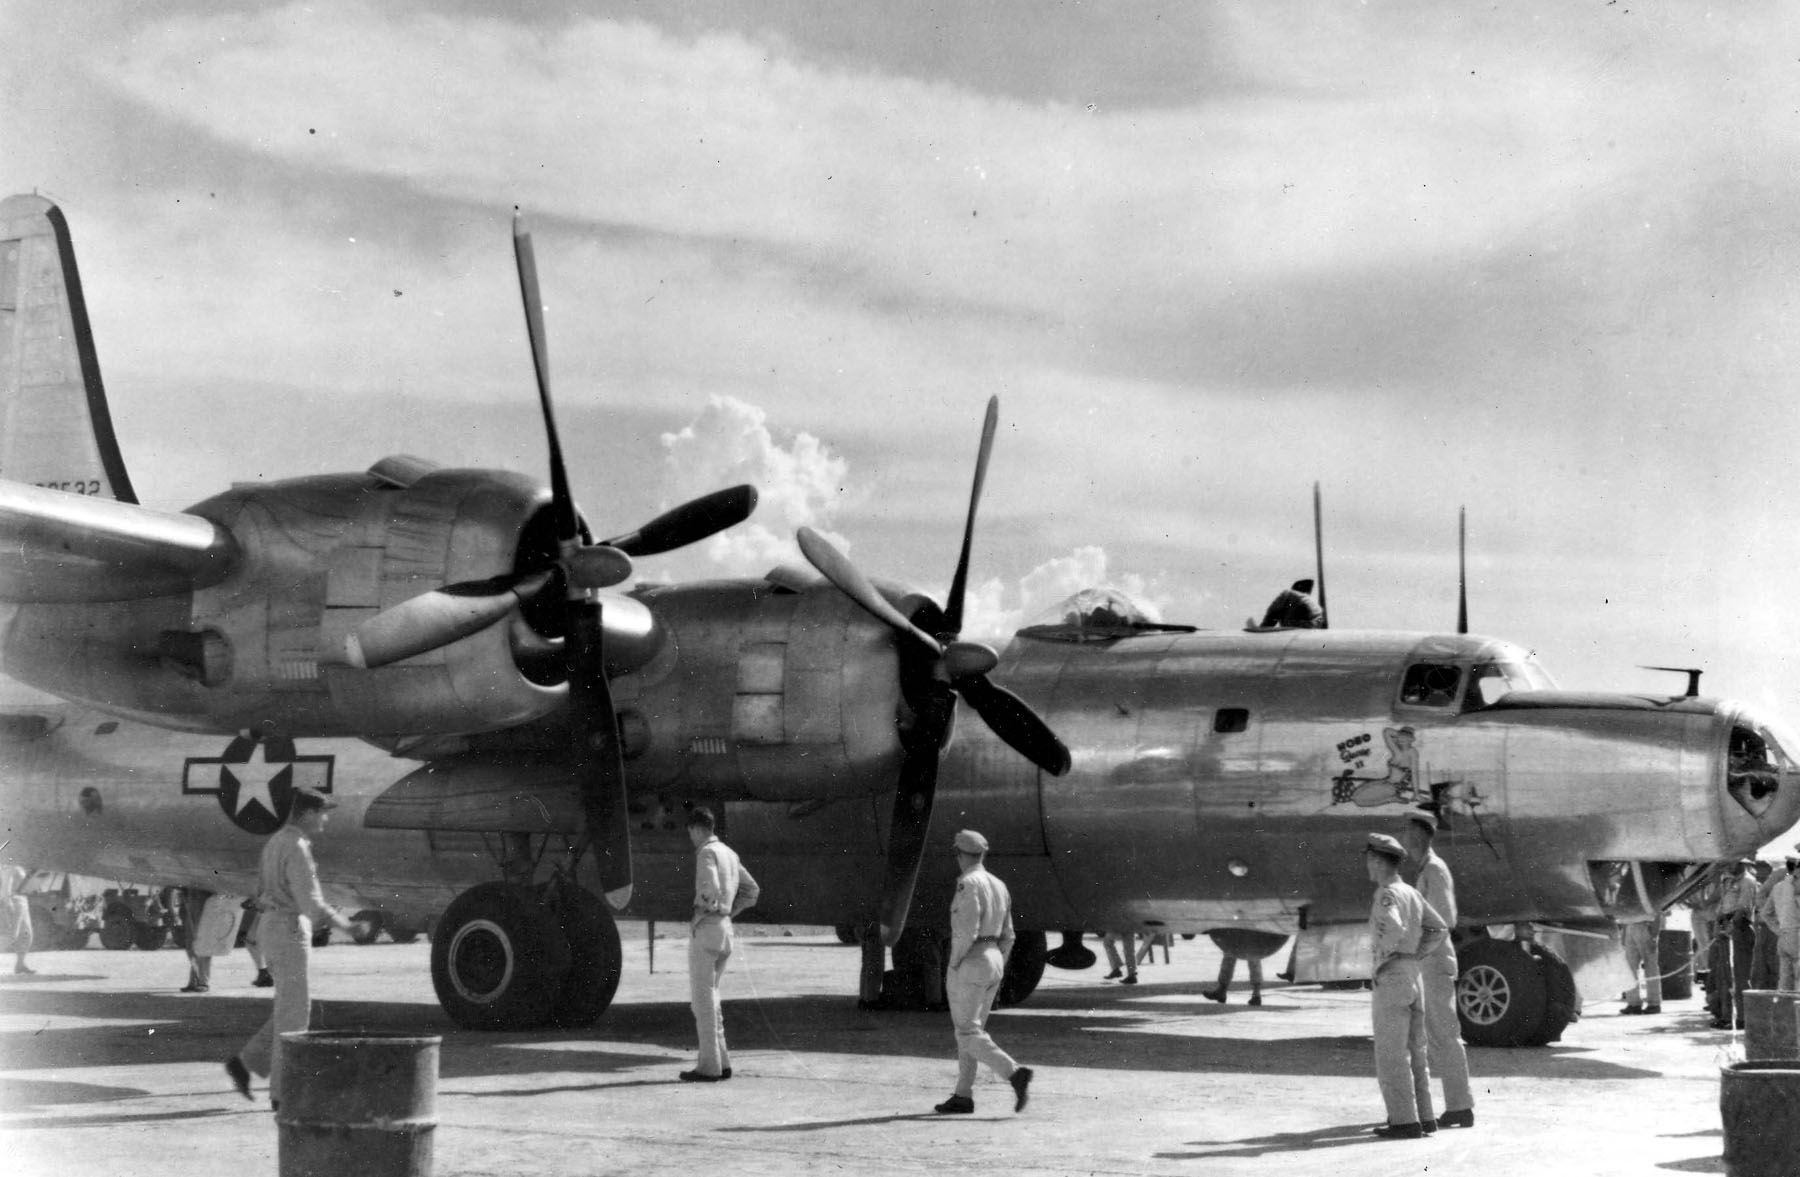 B-32 Dominator bomber 'Hobo Queen II' shortly after her arrival at Clark Field, Manila, Philippine Islands, May 1945